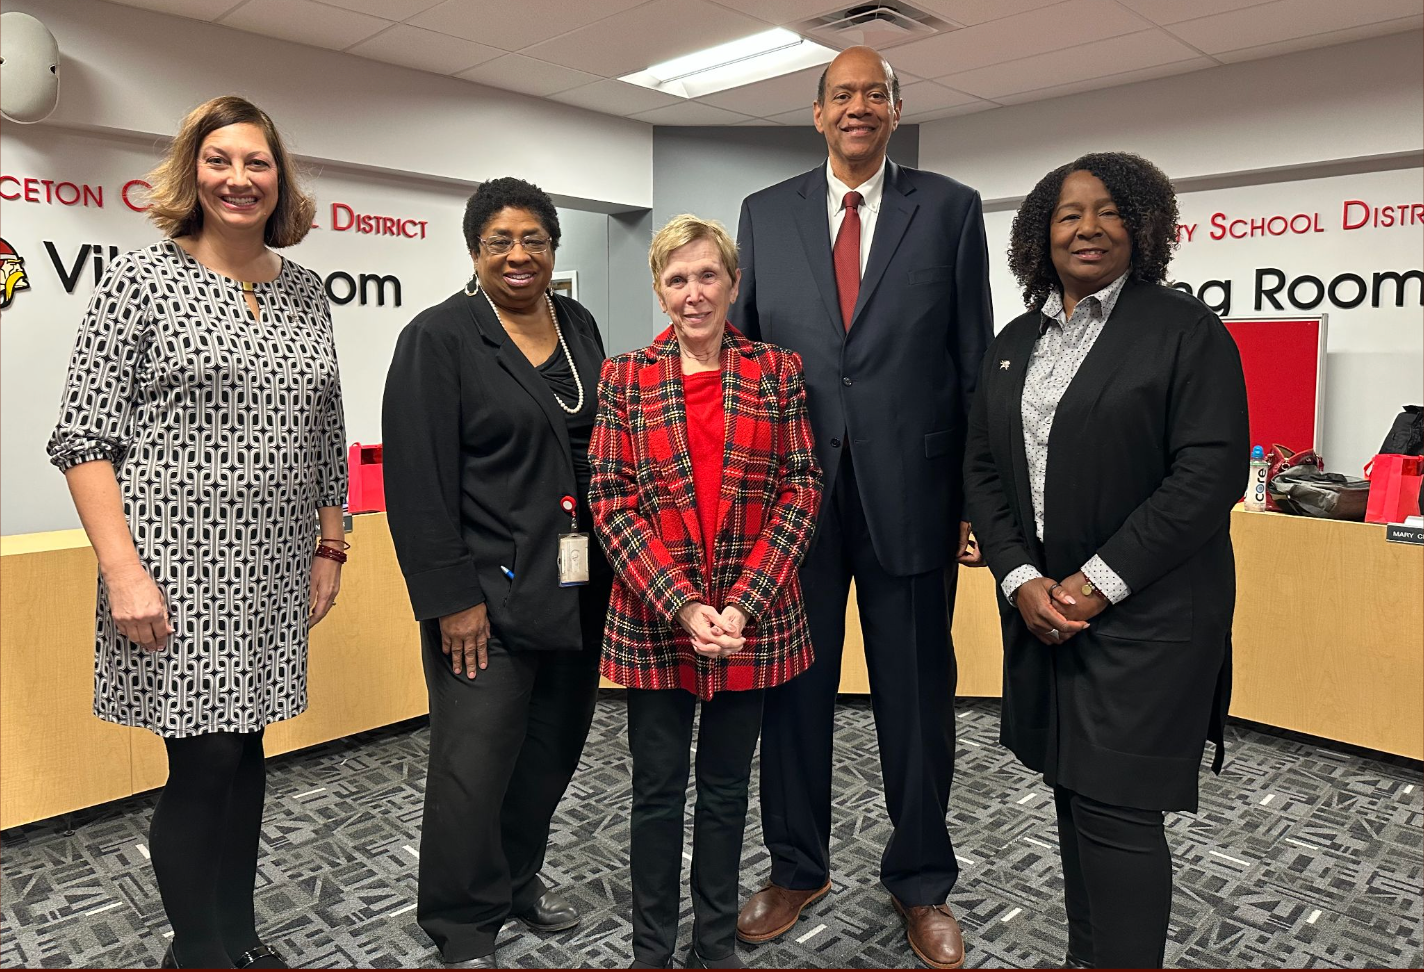 Board of Education photo - Pictured left to right: Jodi Kessler, Vice President; Gina Ruffin Moore; Susan Wyder; Jon Simons, Board President; Mary Cleveland 